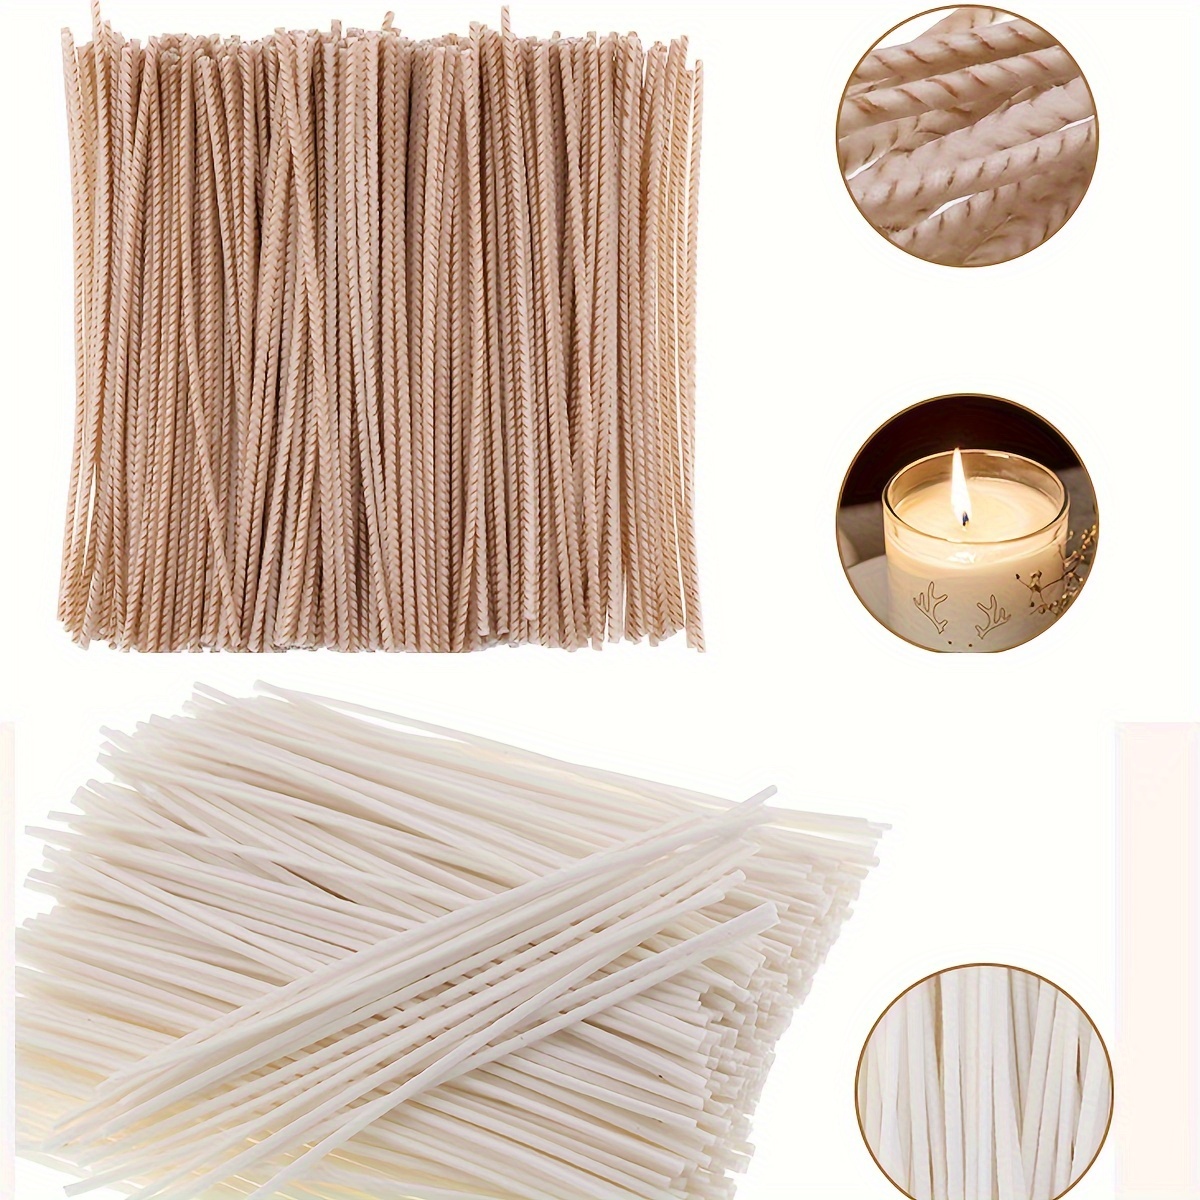 3.5inches/9cm Hemp Wick,100pcs Hemp Candle Wicks In 3mm,Pre-Waxed By  Natural Beeswax & Tabbed,Thick Candle Wick For Candle Making